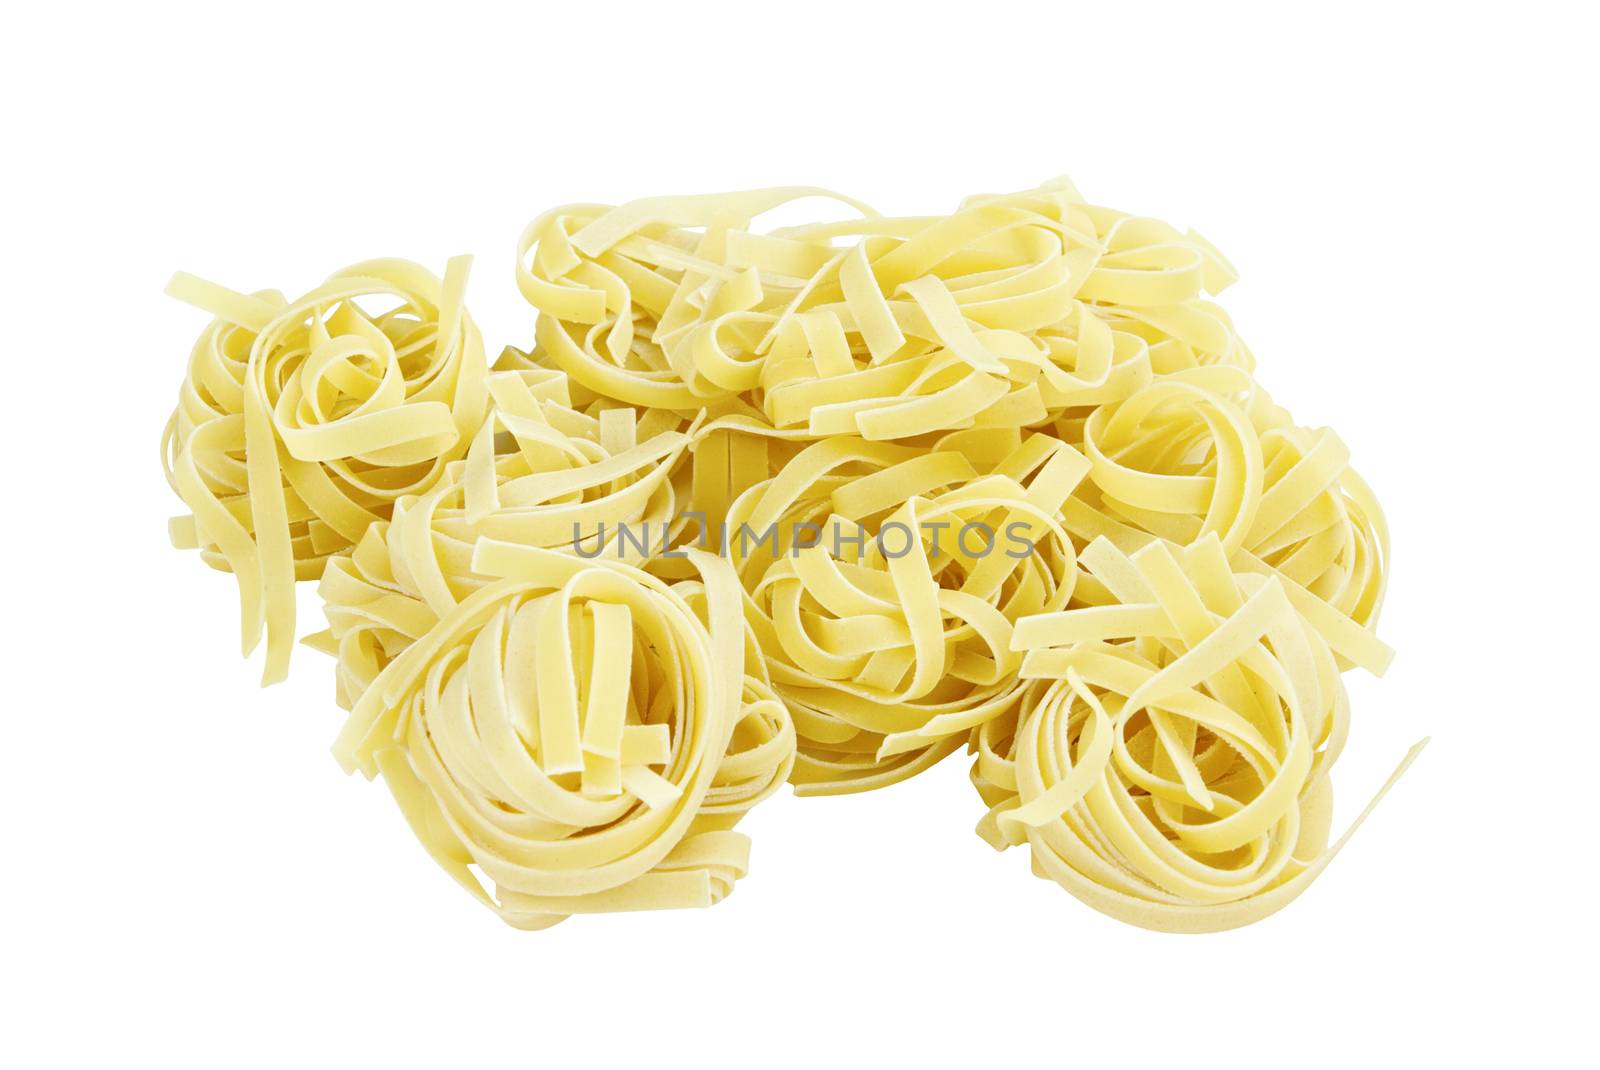 Italian pasta fettuccine nests isolated on white background with clipping path included. 